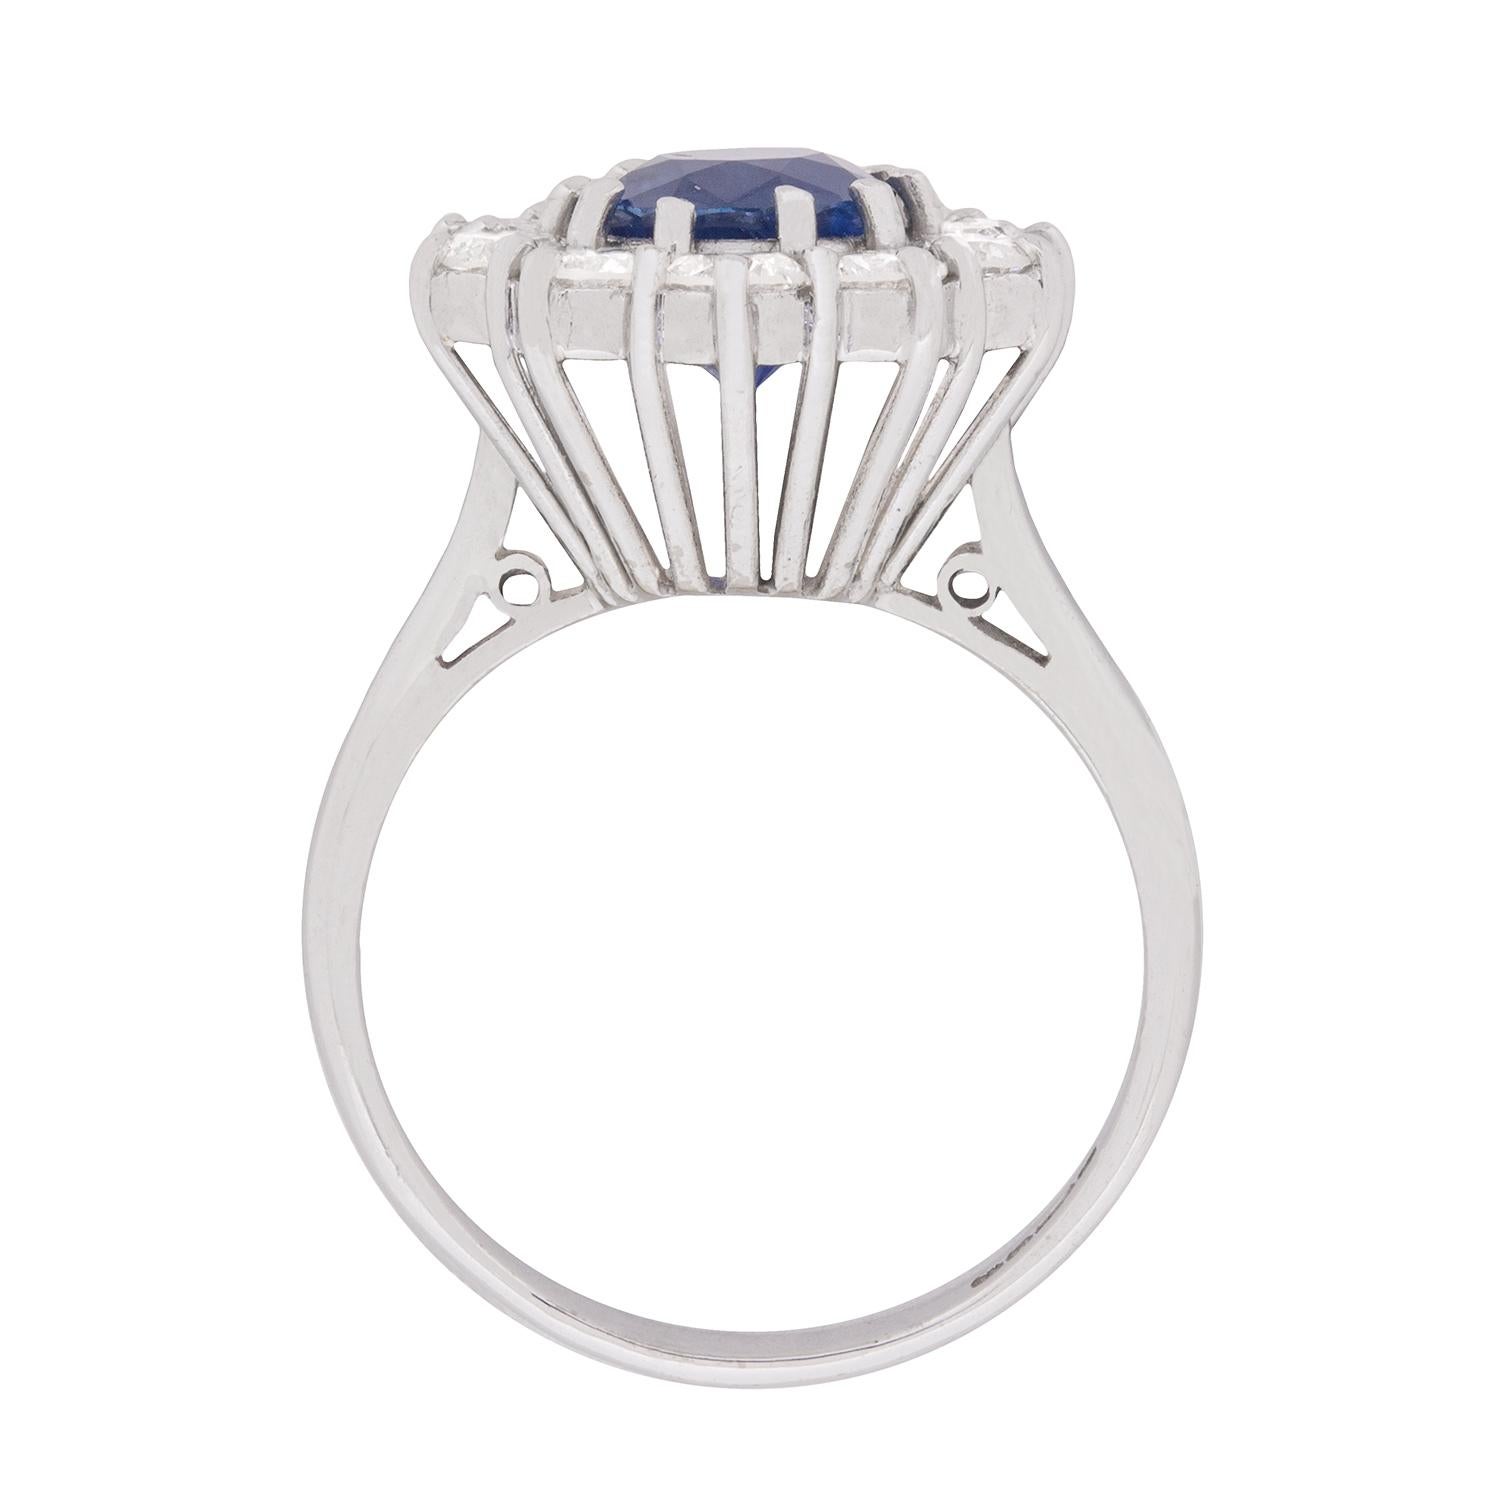 This typically vintage ring features a sapphire as the star of the show, with an impressive blue shine. It weighs 1.75 carat and is haloed by ten round brilliant diamonds. The diamonds have a combined weight of 1.50 carat and are of high quality,